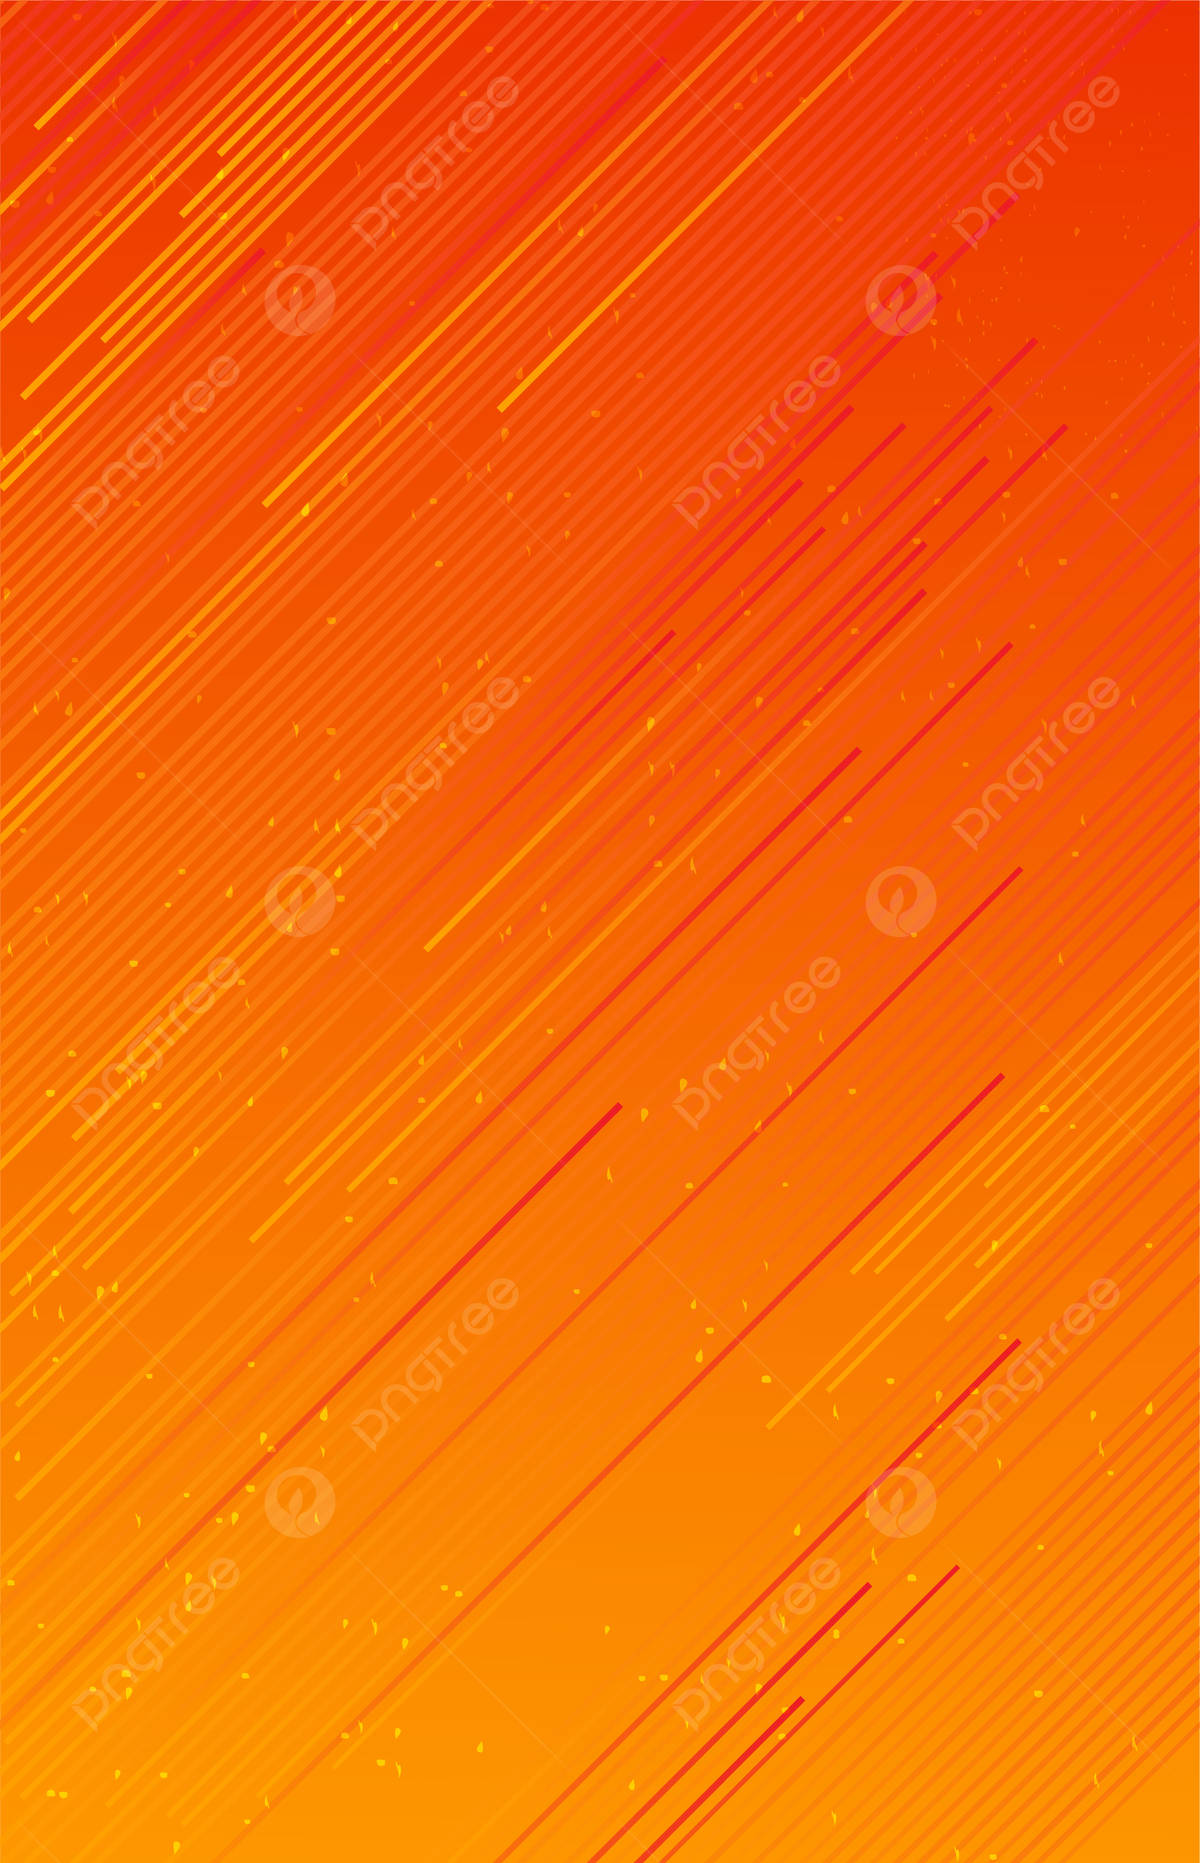 "Vibrant and eye-catching Solid Orange!" Wallpaper